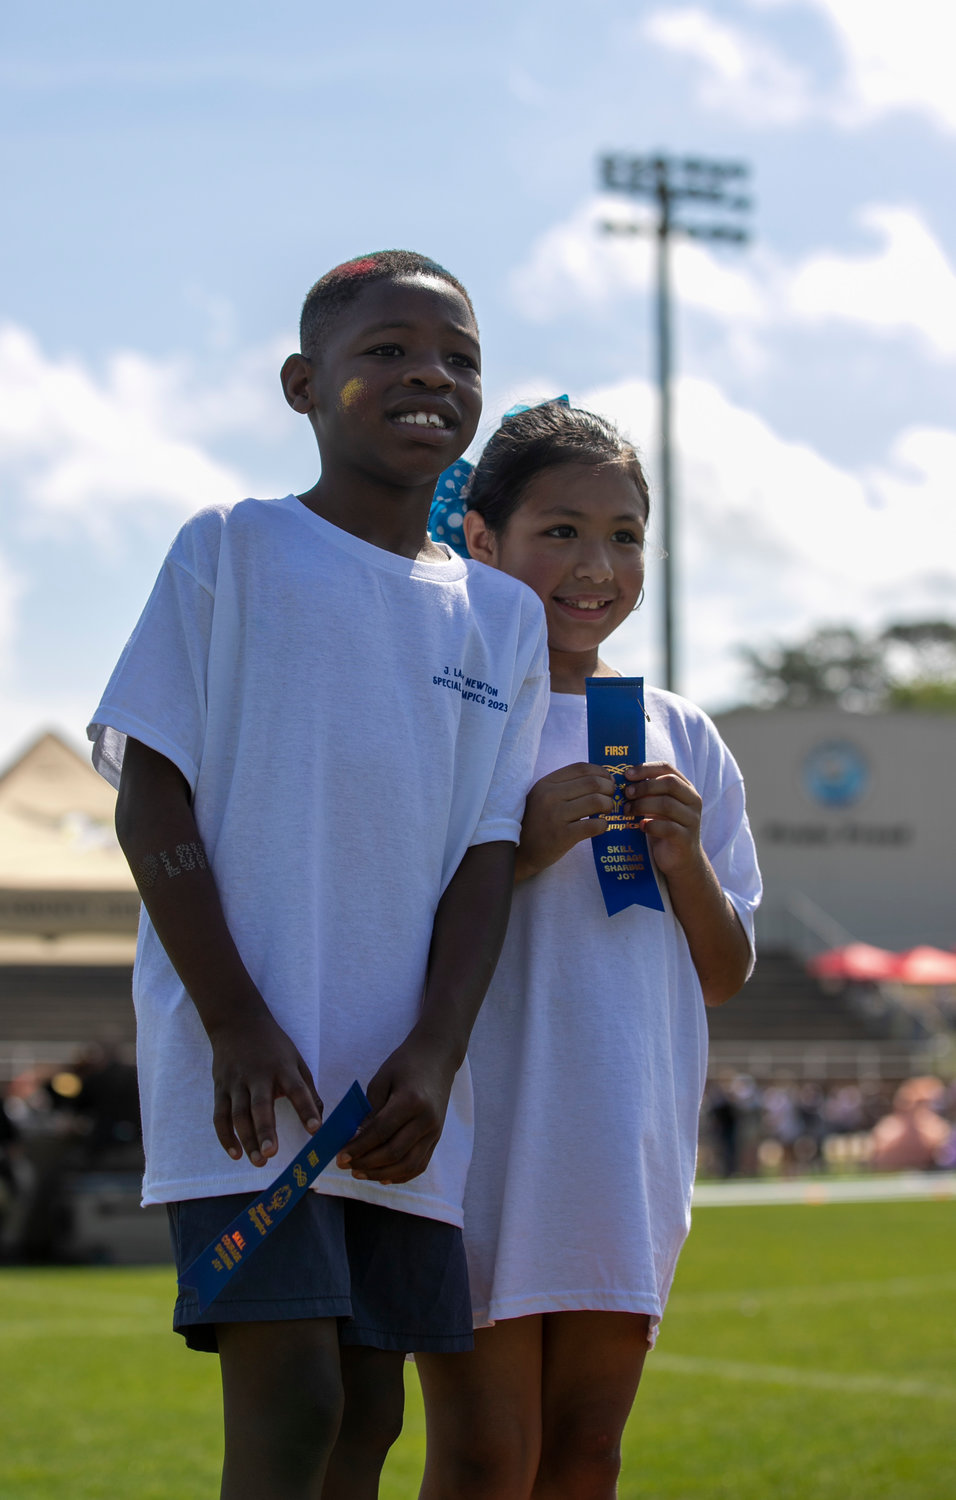 A pair of J. Larry Newton students swept the running event and took their rightful spots atop the podium Thursday, April 6, at the Baldwin County Public Schools Spring Games in Fairhope.